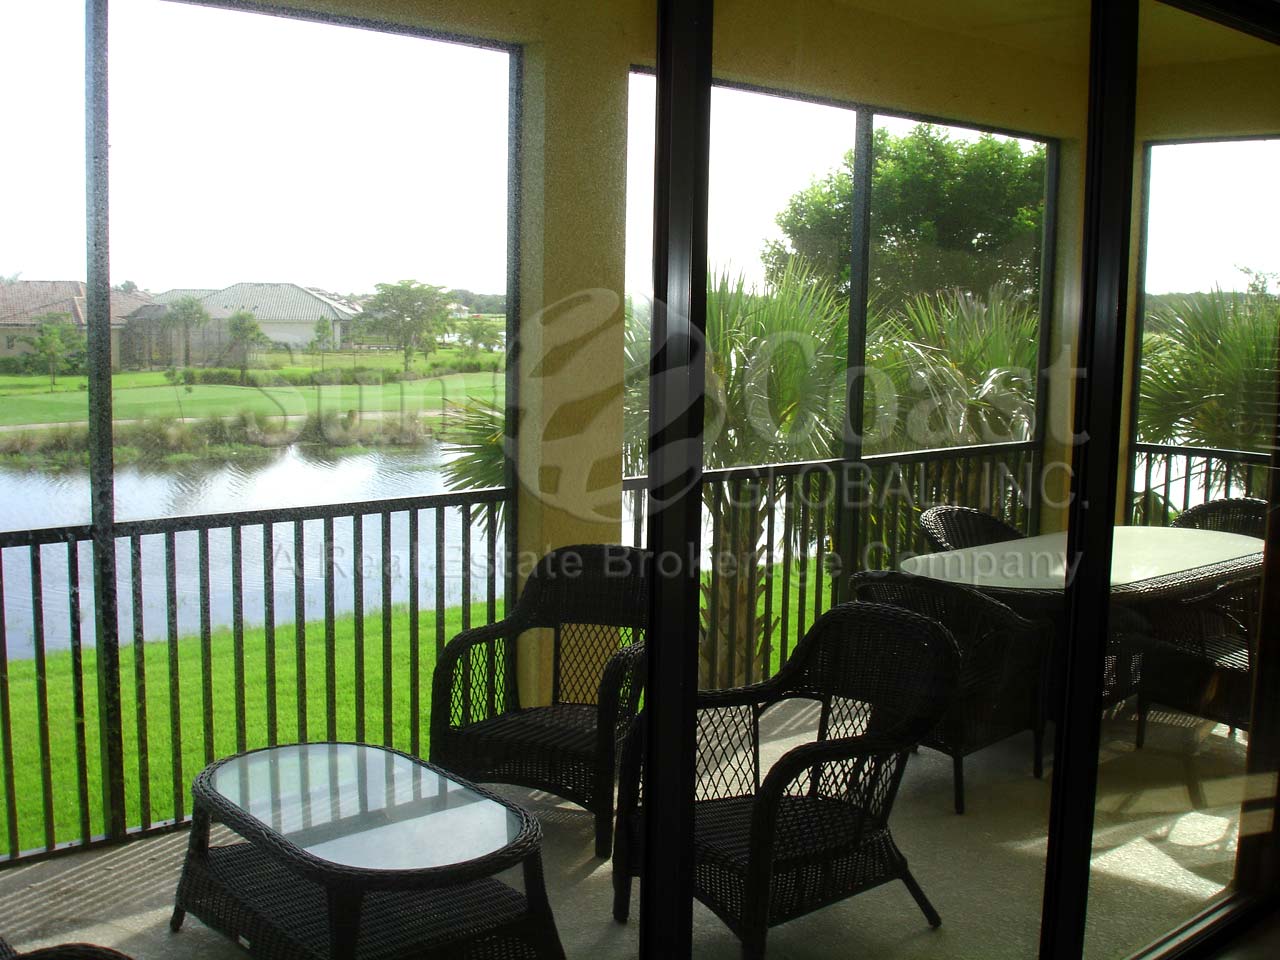 Covent Garden Interior Example of Lanai overlooking the Community Lake